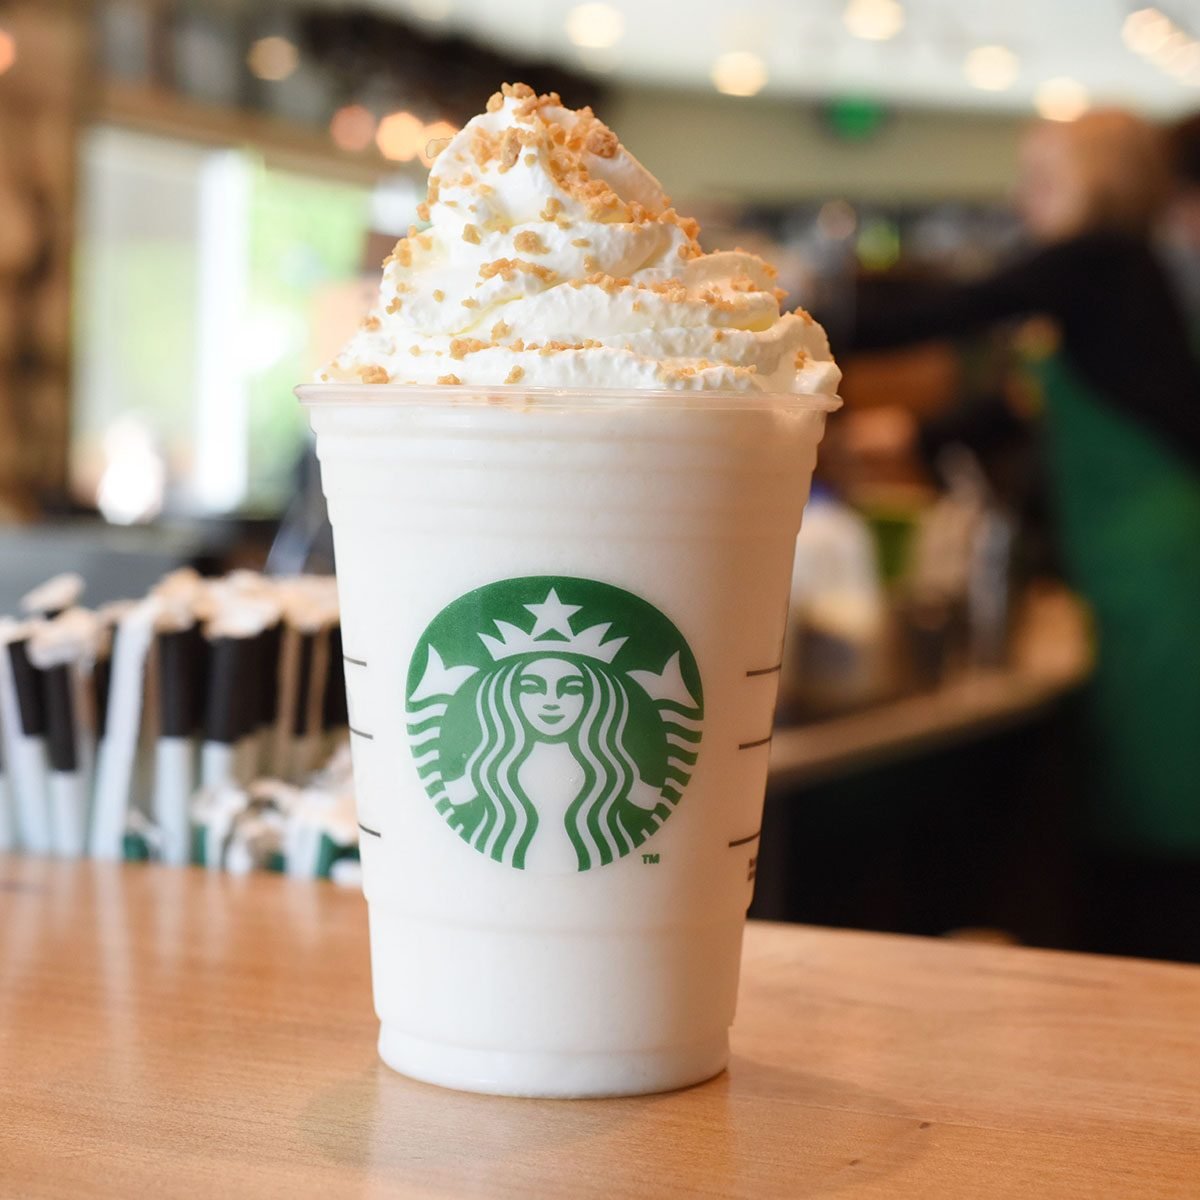 9 Things You Didn’t Know About the Starbucks Frappuccino